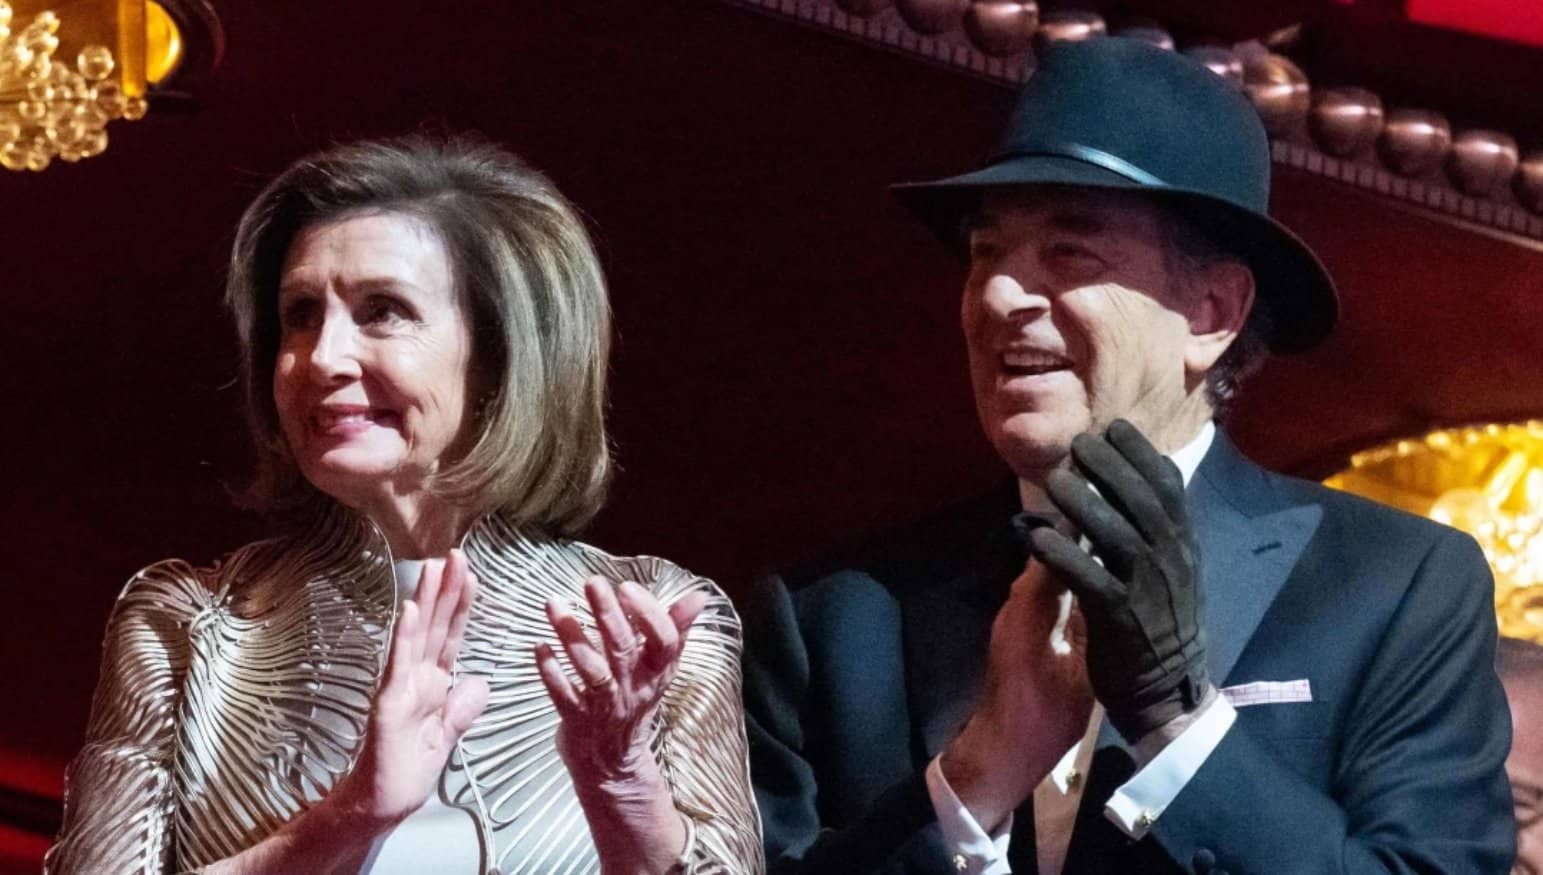 Paul Pelosi Shows Up at Kennedy Center Honors Wearing Black Glove and Black Hat – No Hammer in Hand